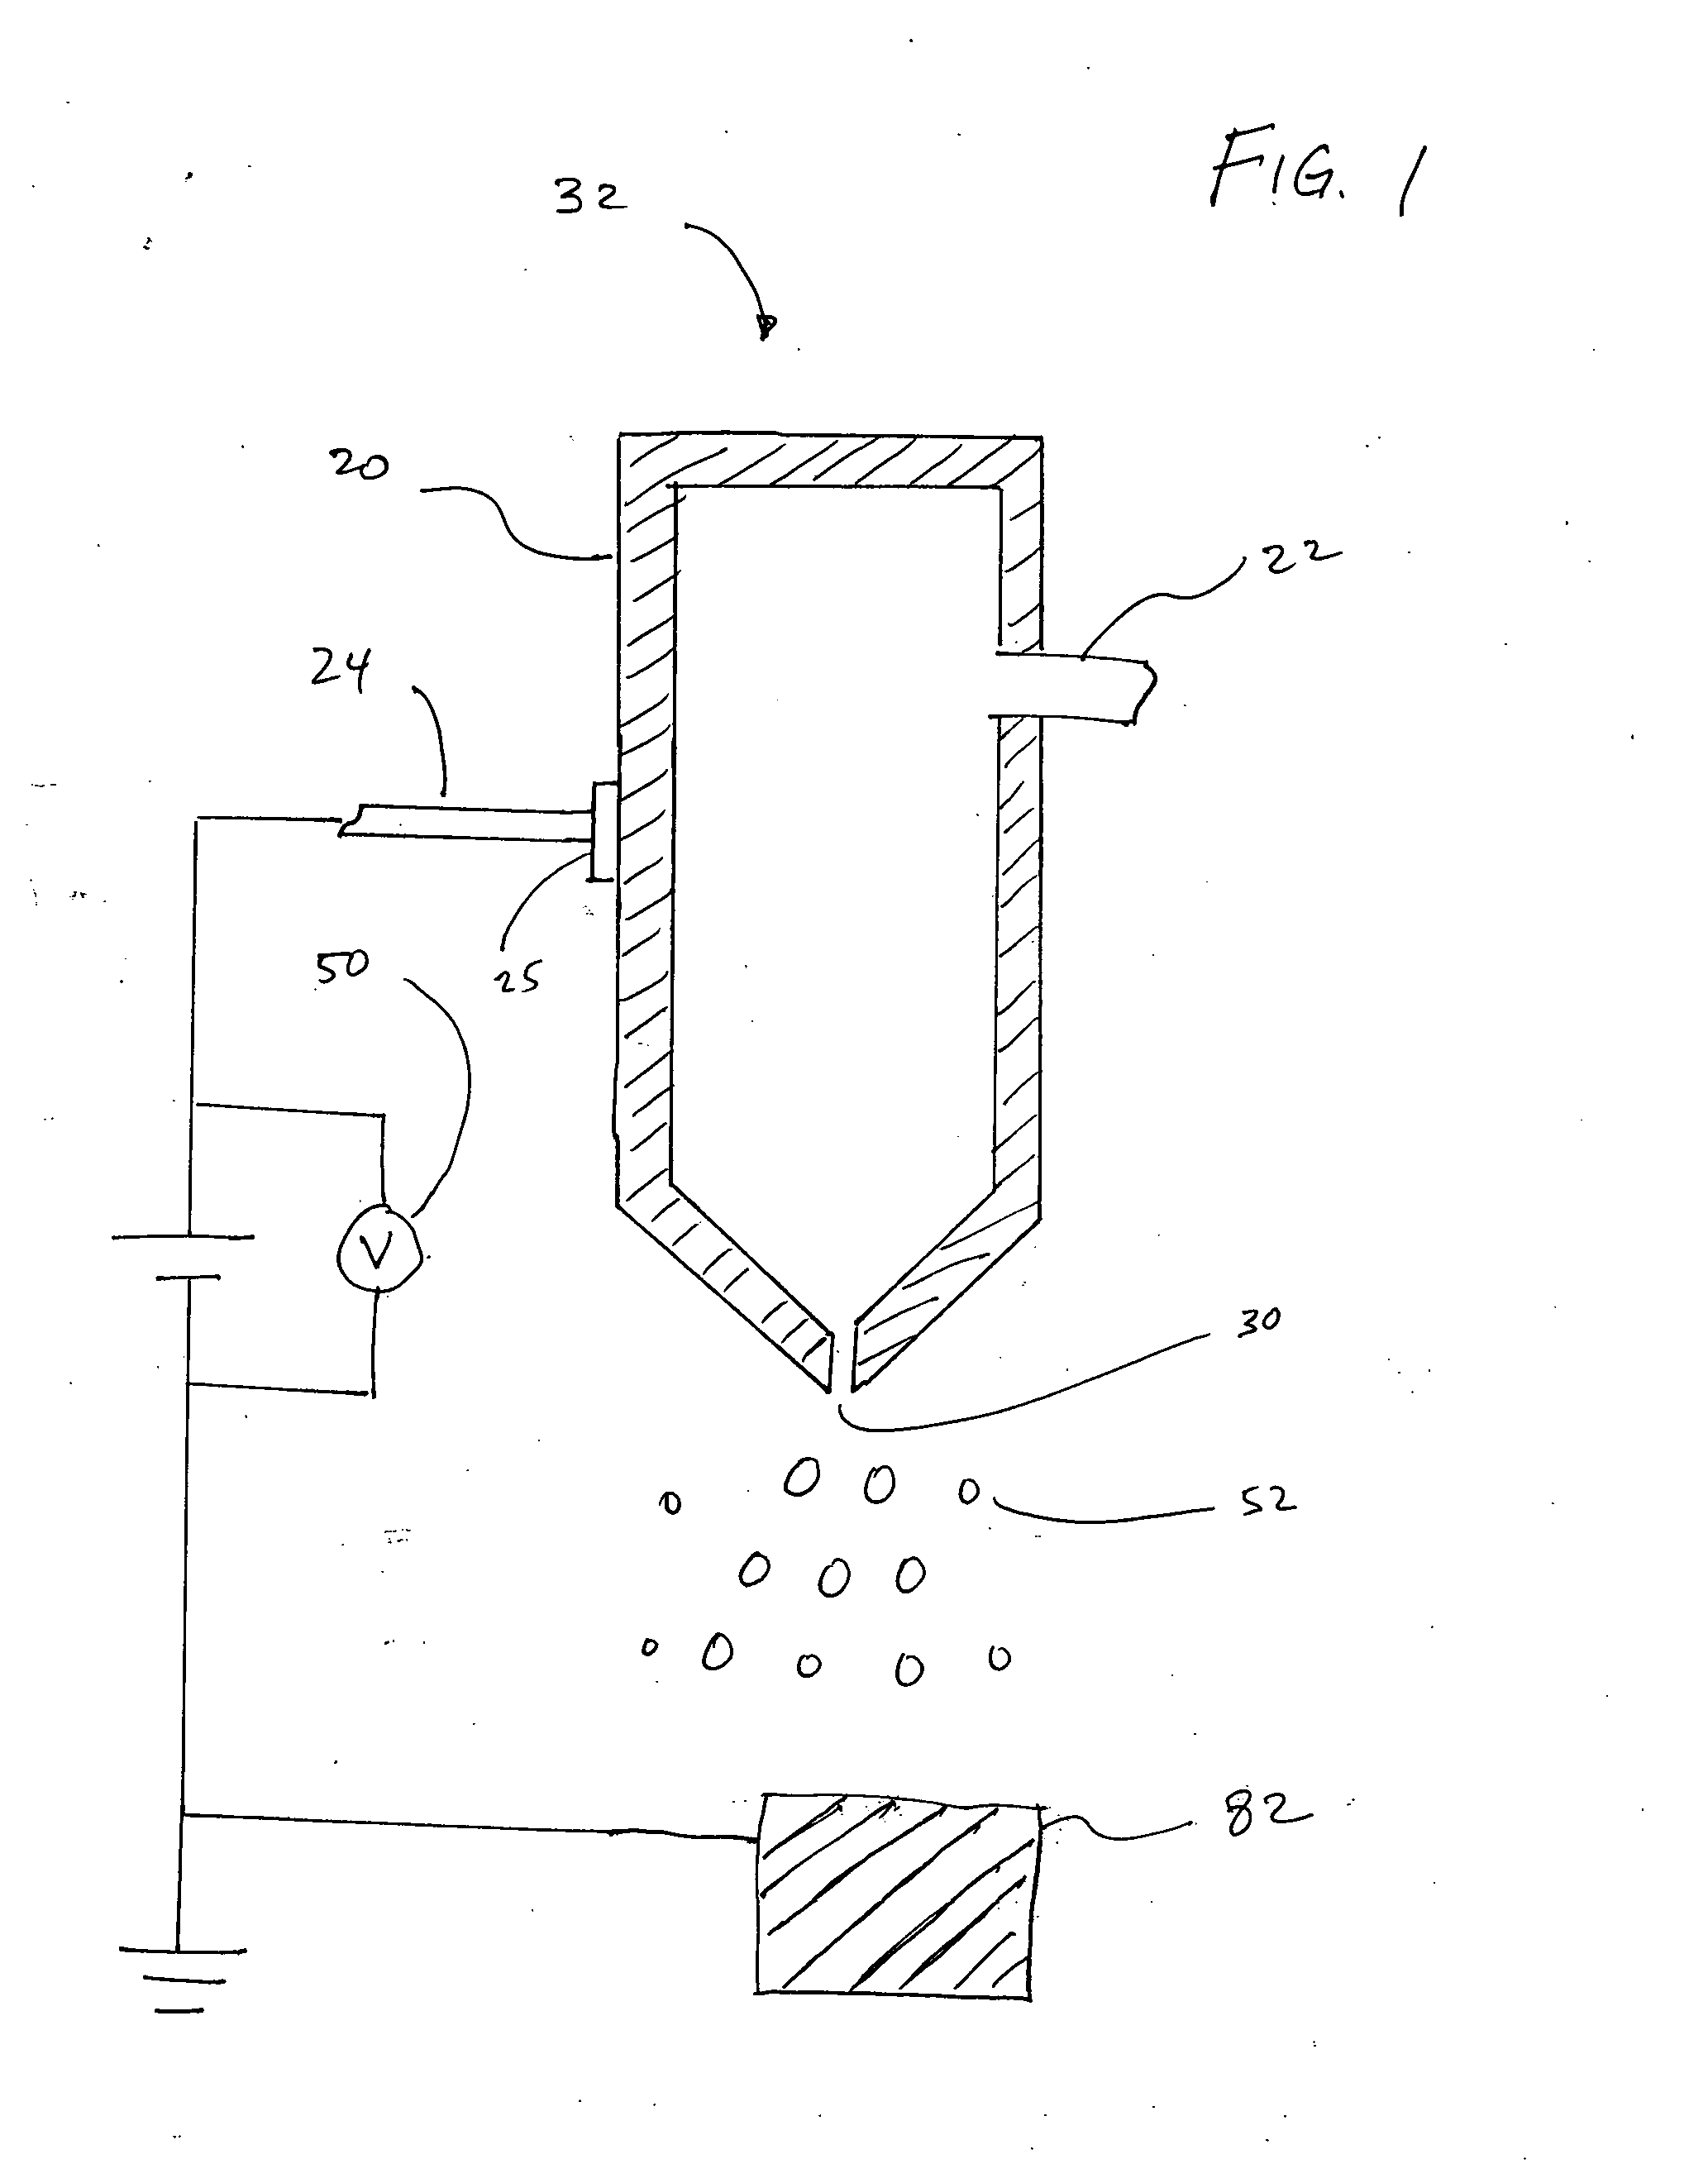 System and method for electrostatic-assisted spray coating of a medical device